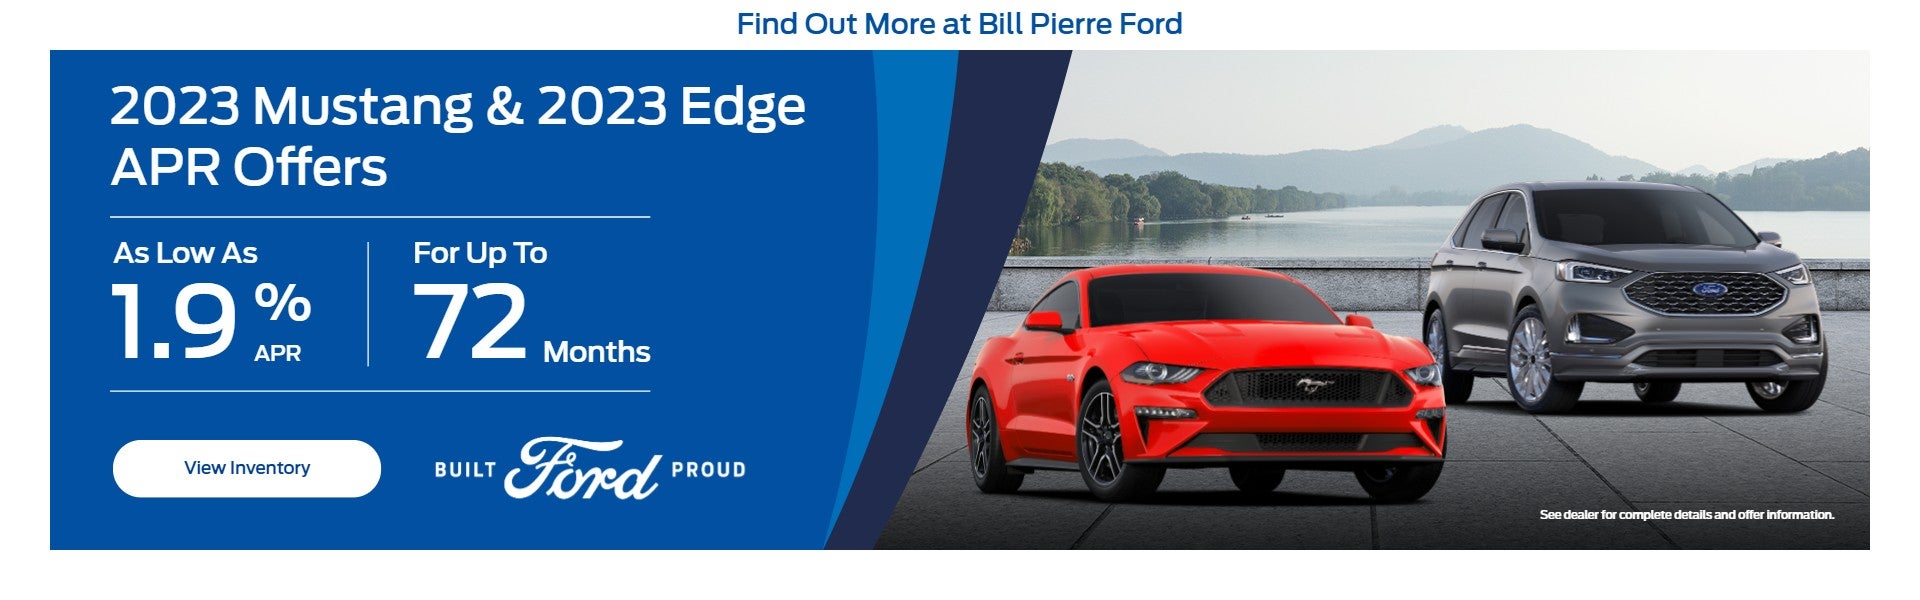 2023 Mustang and 2023 Edge APR Offers